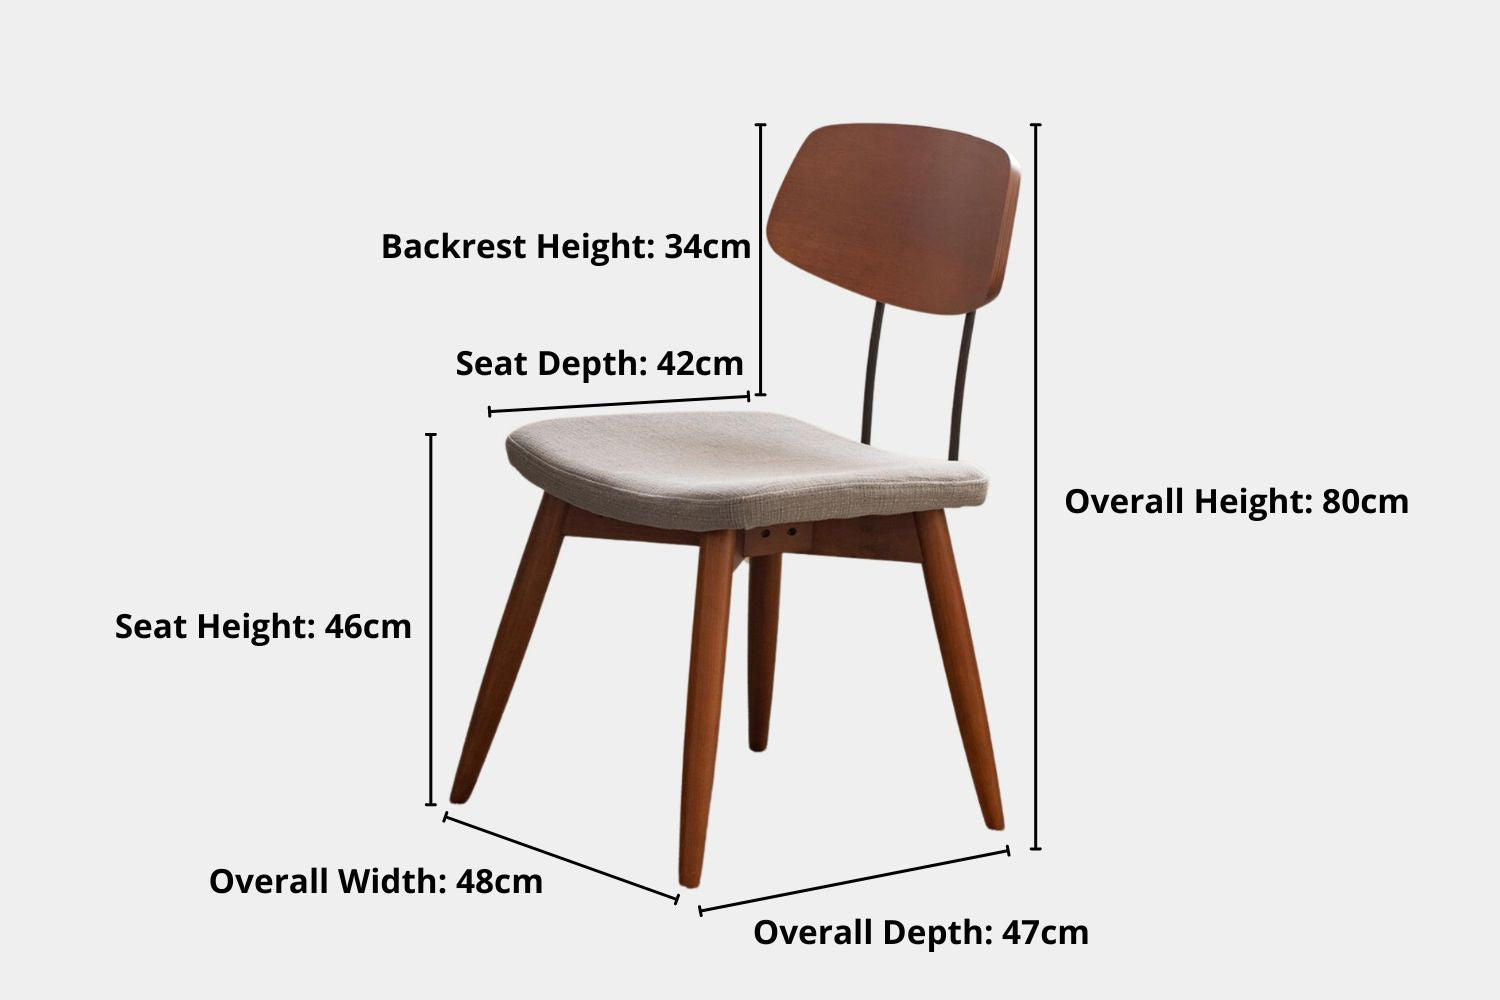 Key product dimensions such as depth, width and height for Tate Poplar Wood Chair